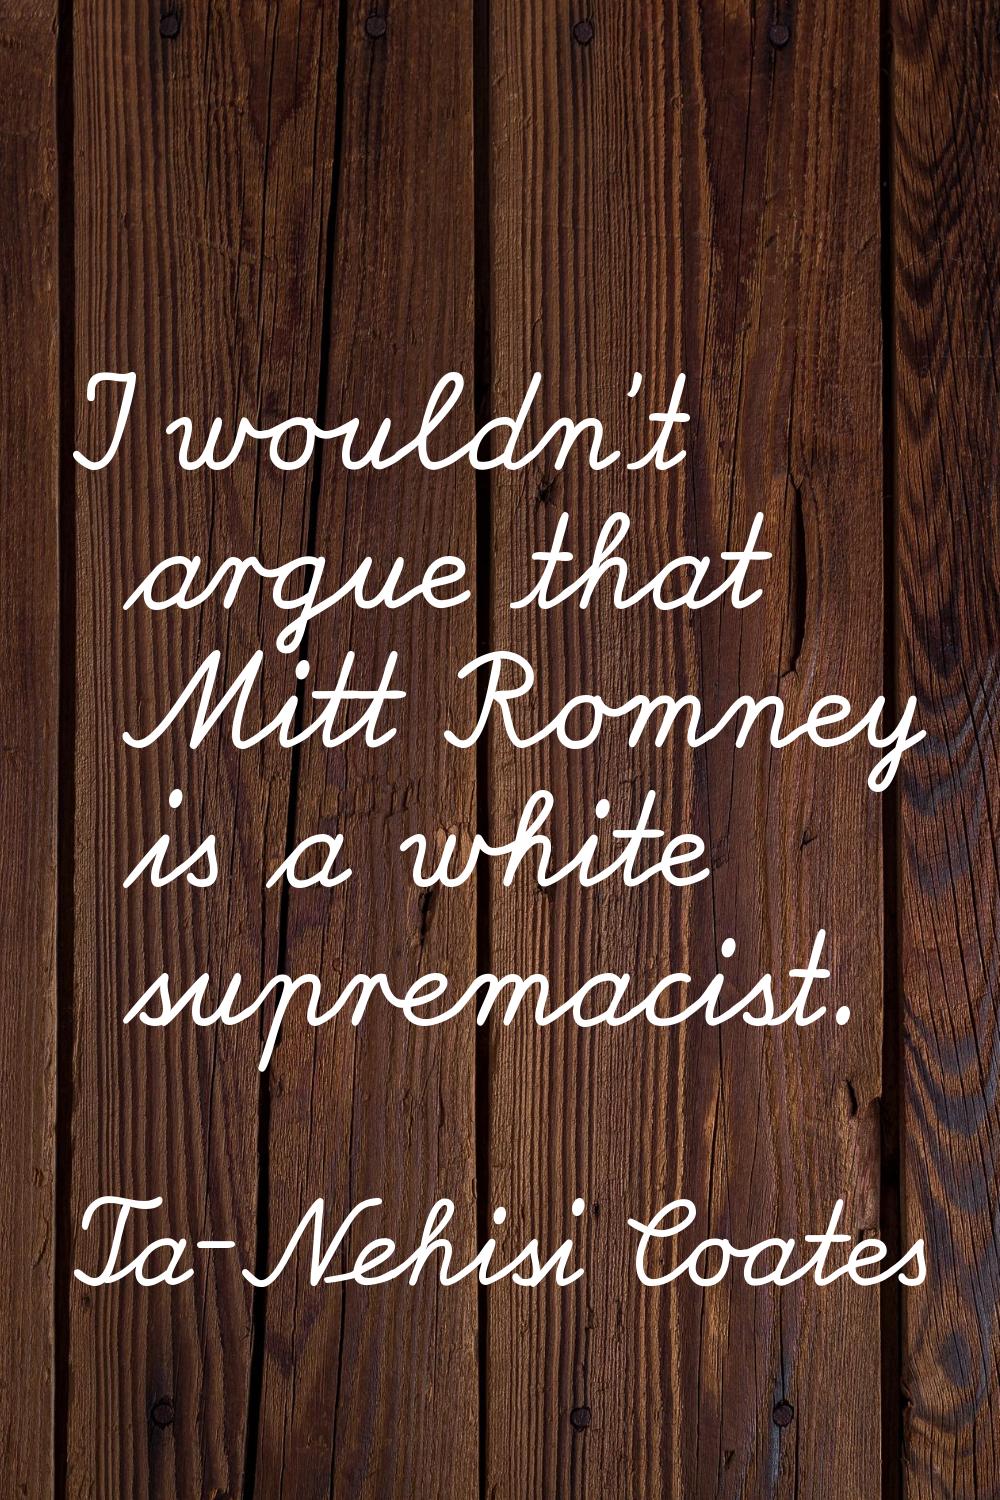 I wouldn't argue that Mitt Romney is a white supremacist.